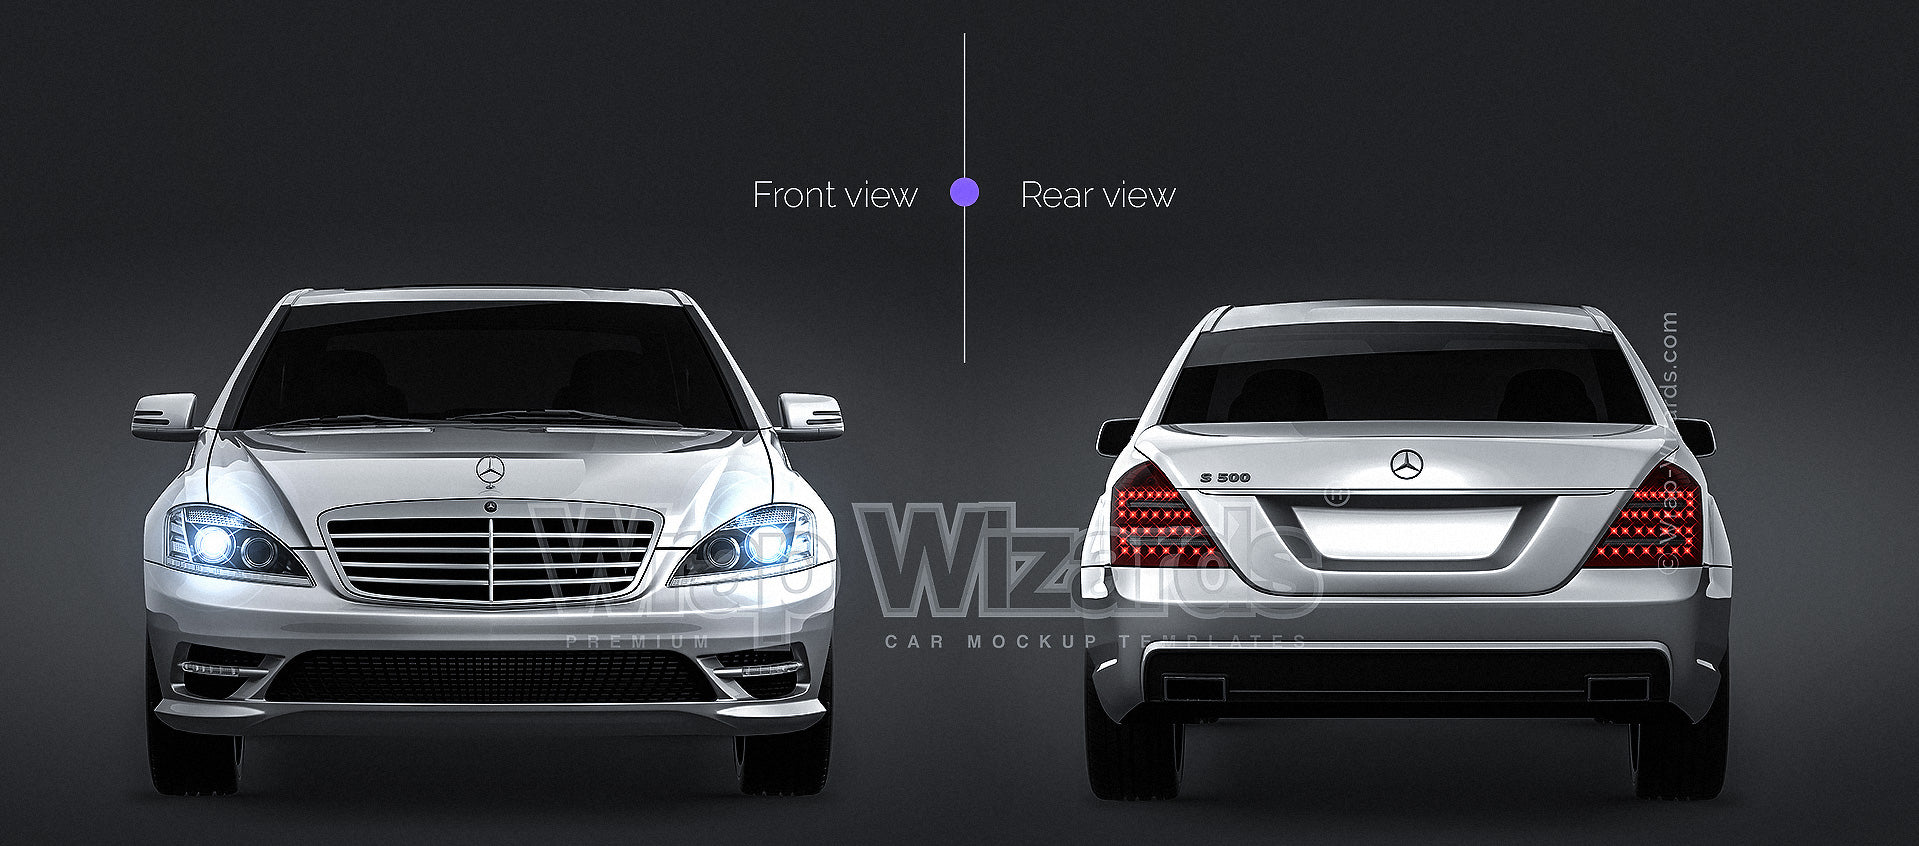 Mercedes-Benz S-Class AMG 2010 glossy finish - all sides Car Mockup Template.psd